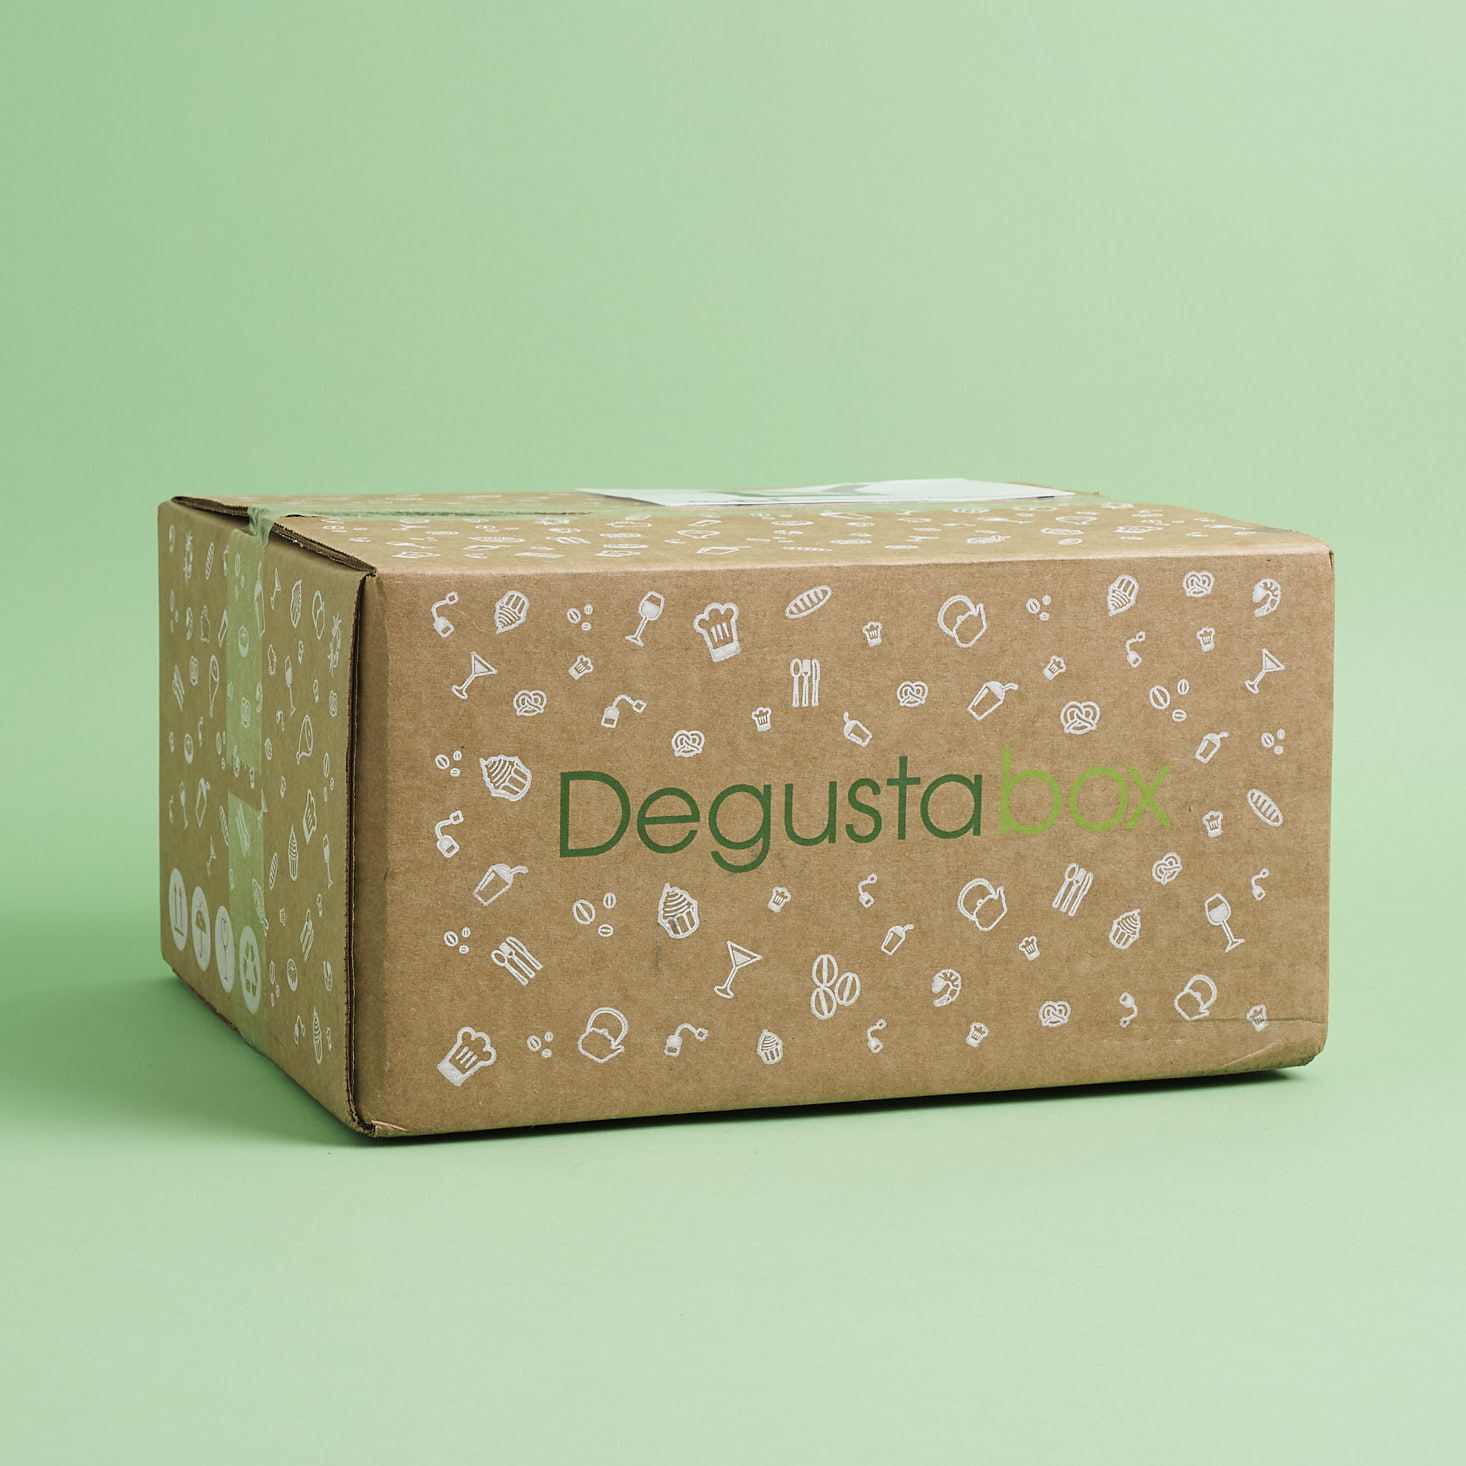 Degustabox Food Subscription Review + Coupon – June 2018